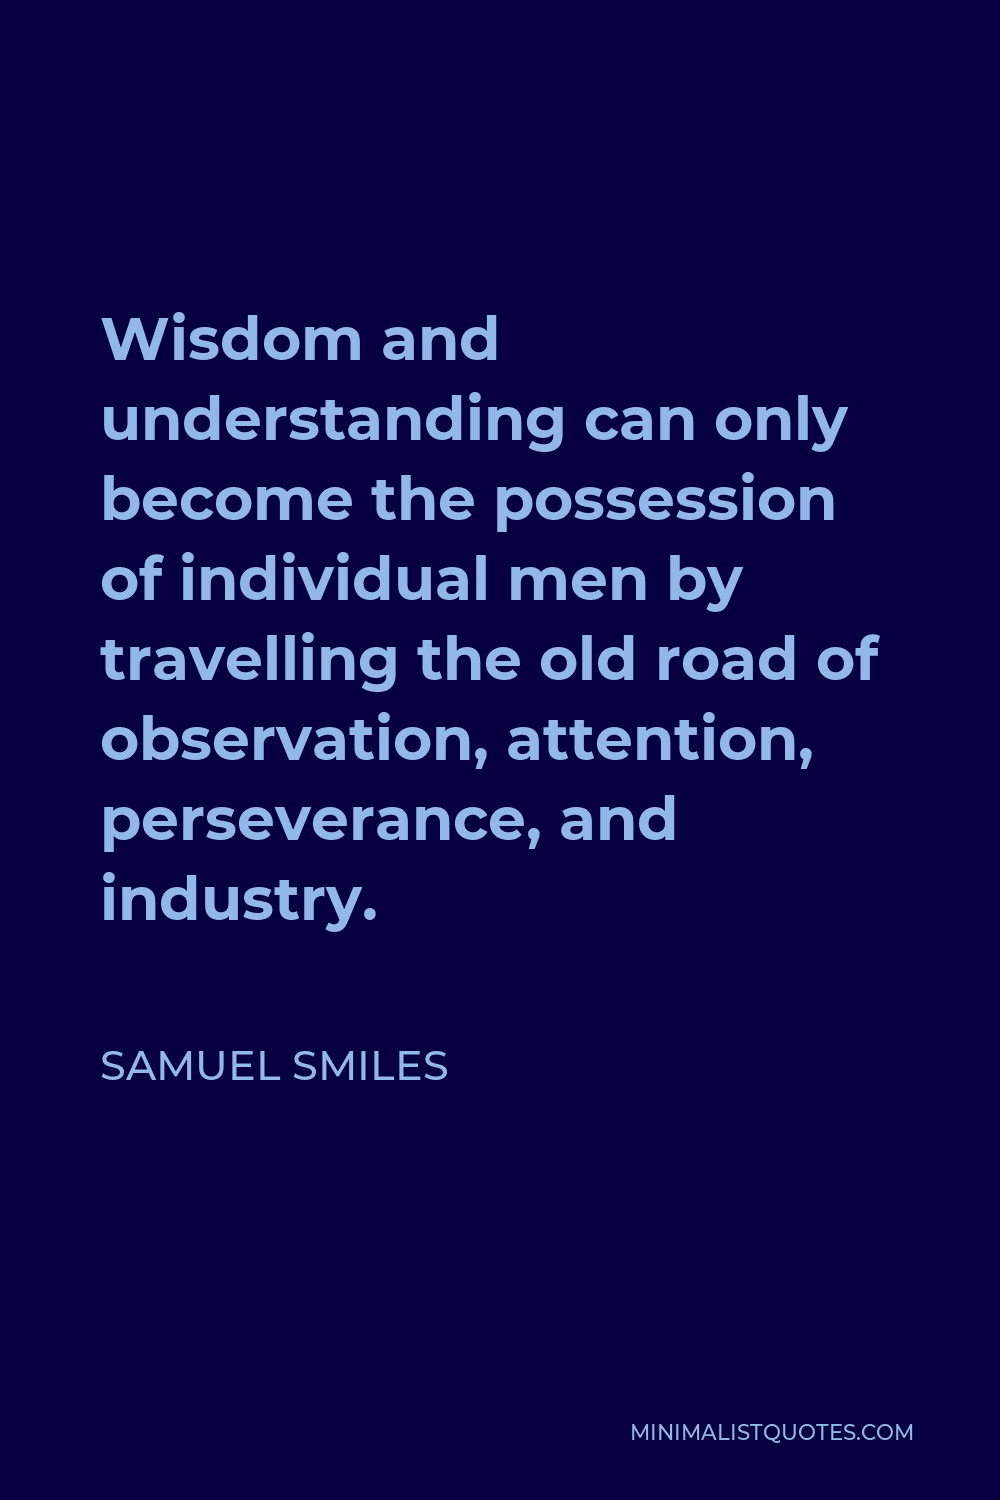 Samuel Smiles Quote - Wisdom and understanding can only become the possession of individual men by travelling the old road of observation, attention, perseverance, and industry.